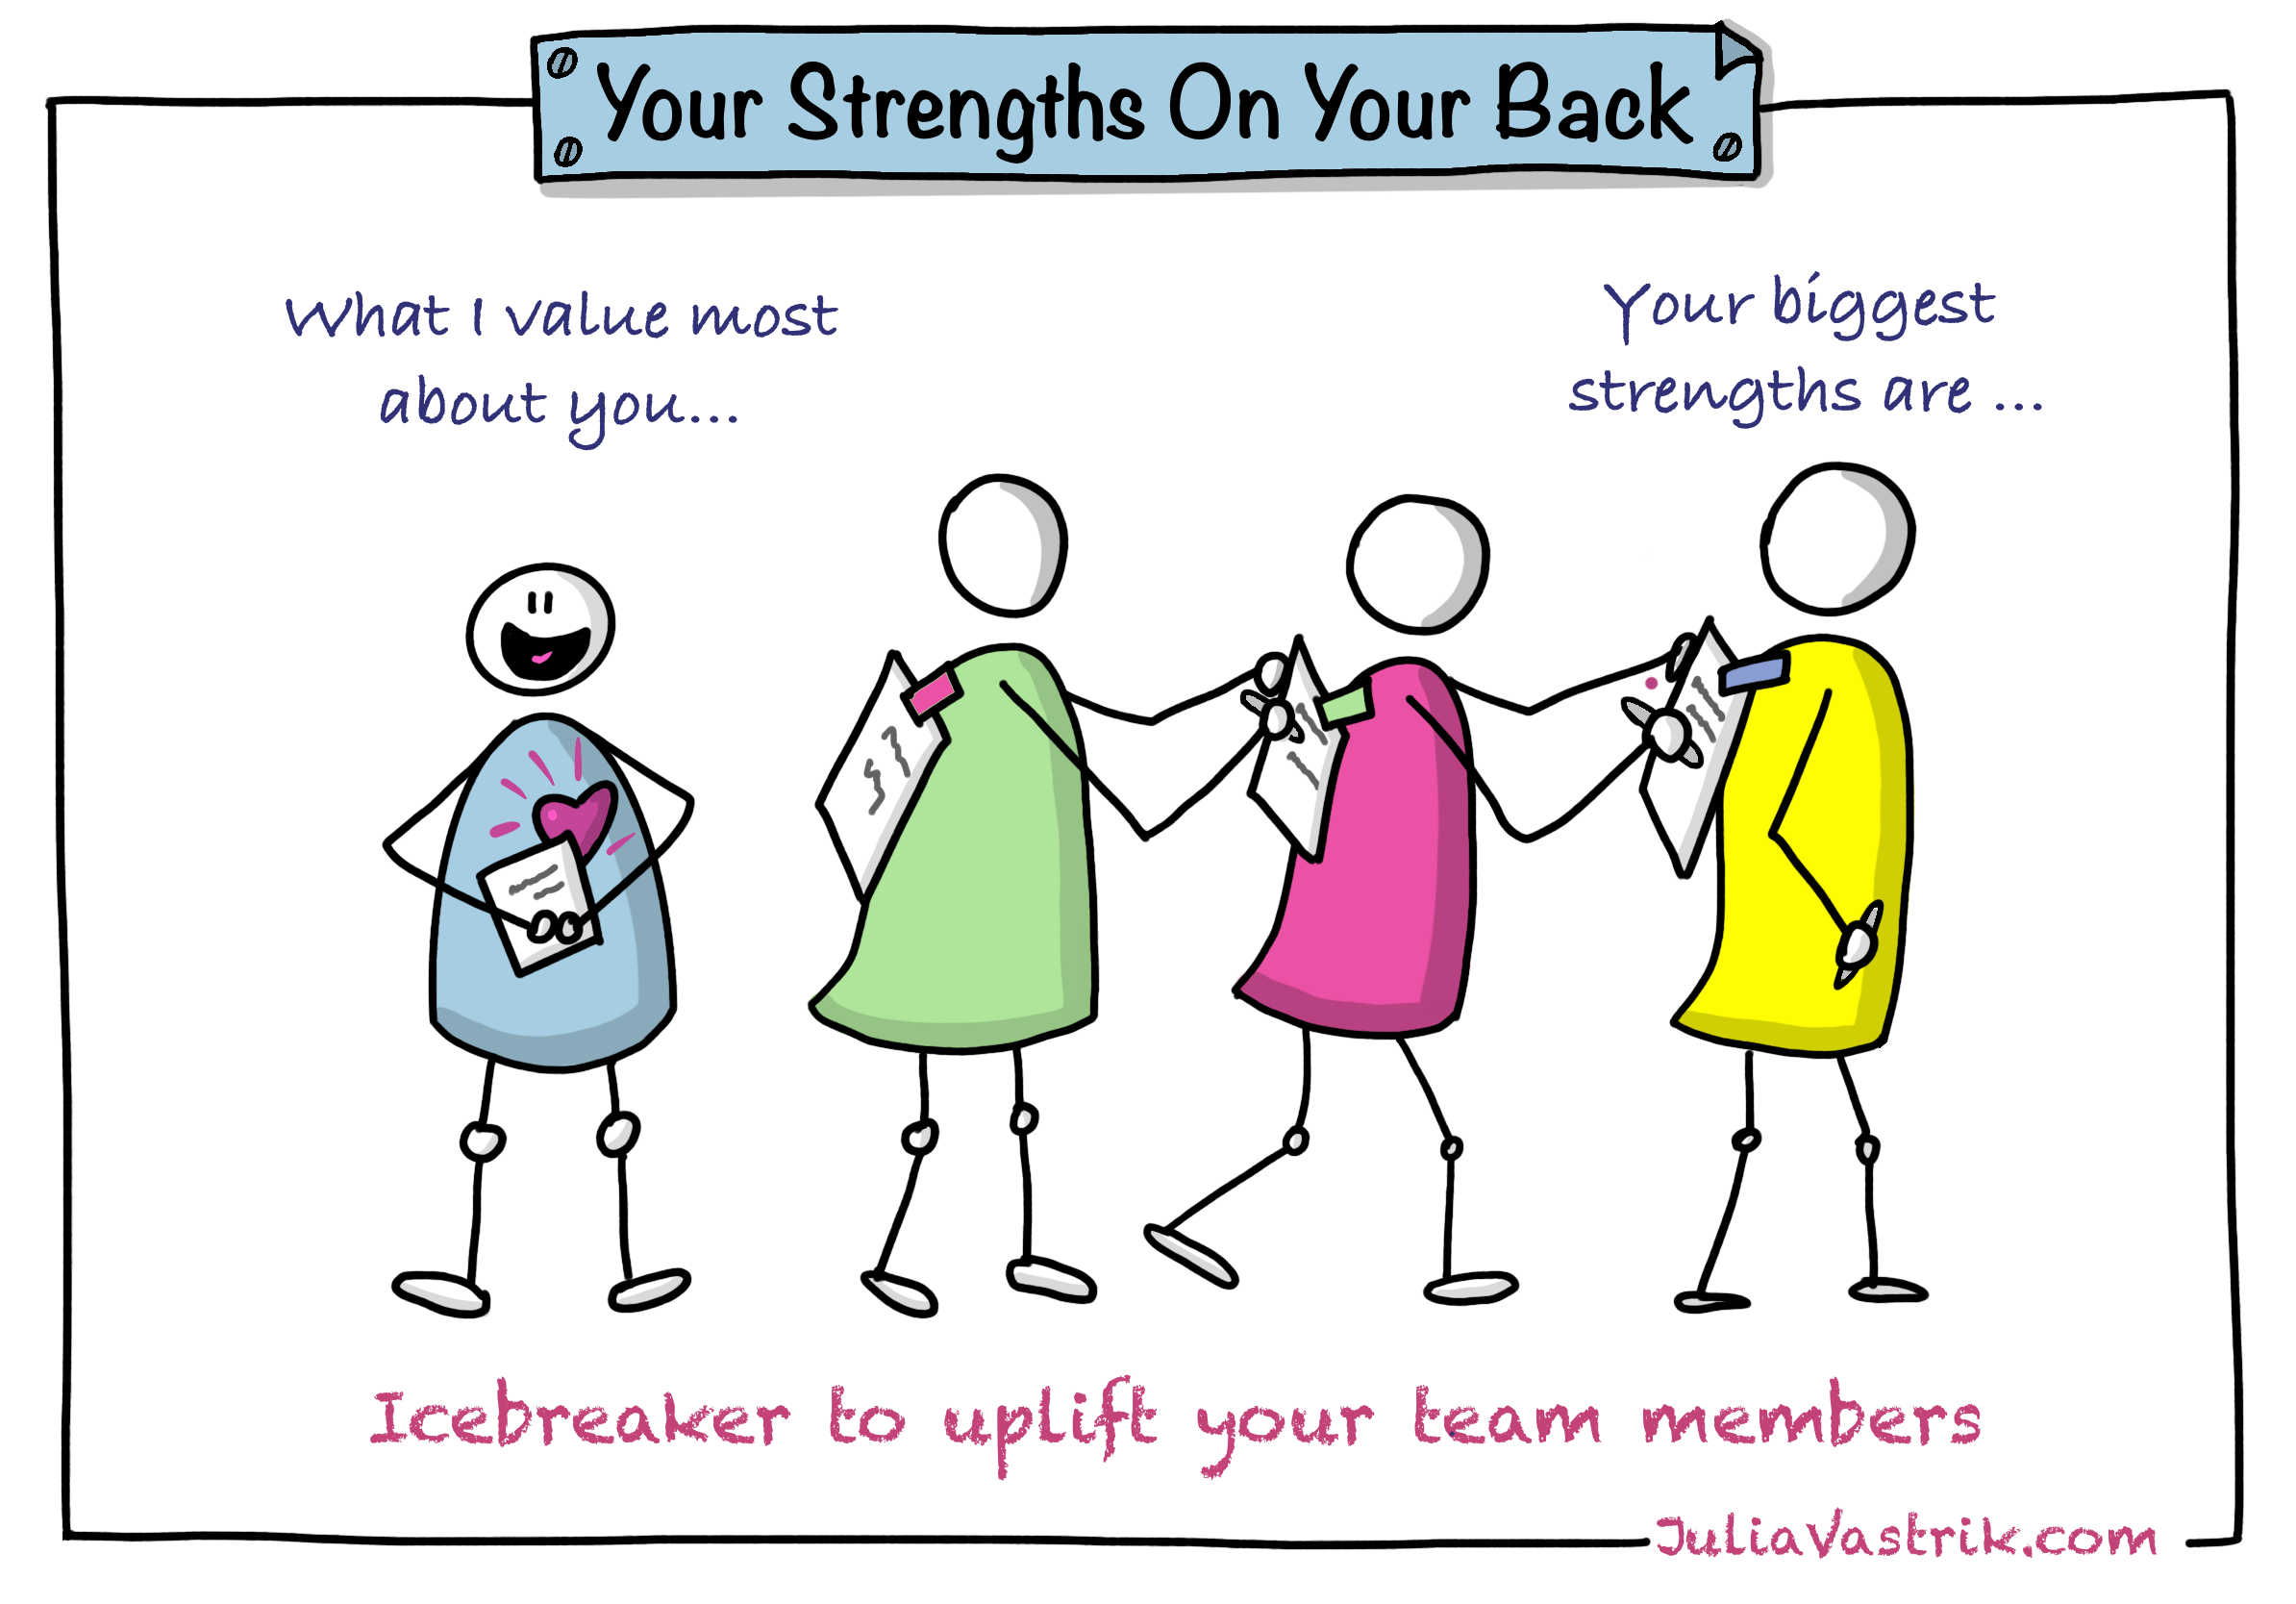 ‘Your Strengths on Your Back’ Icebreaker